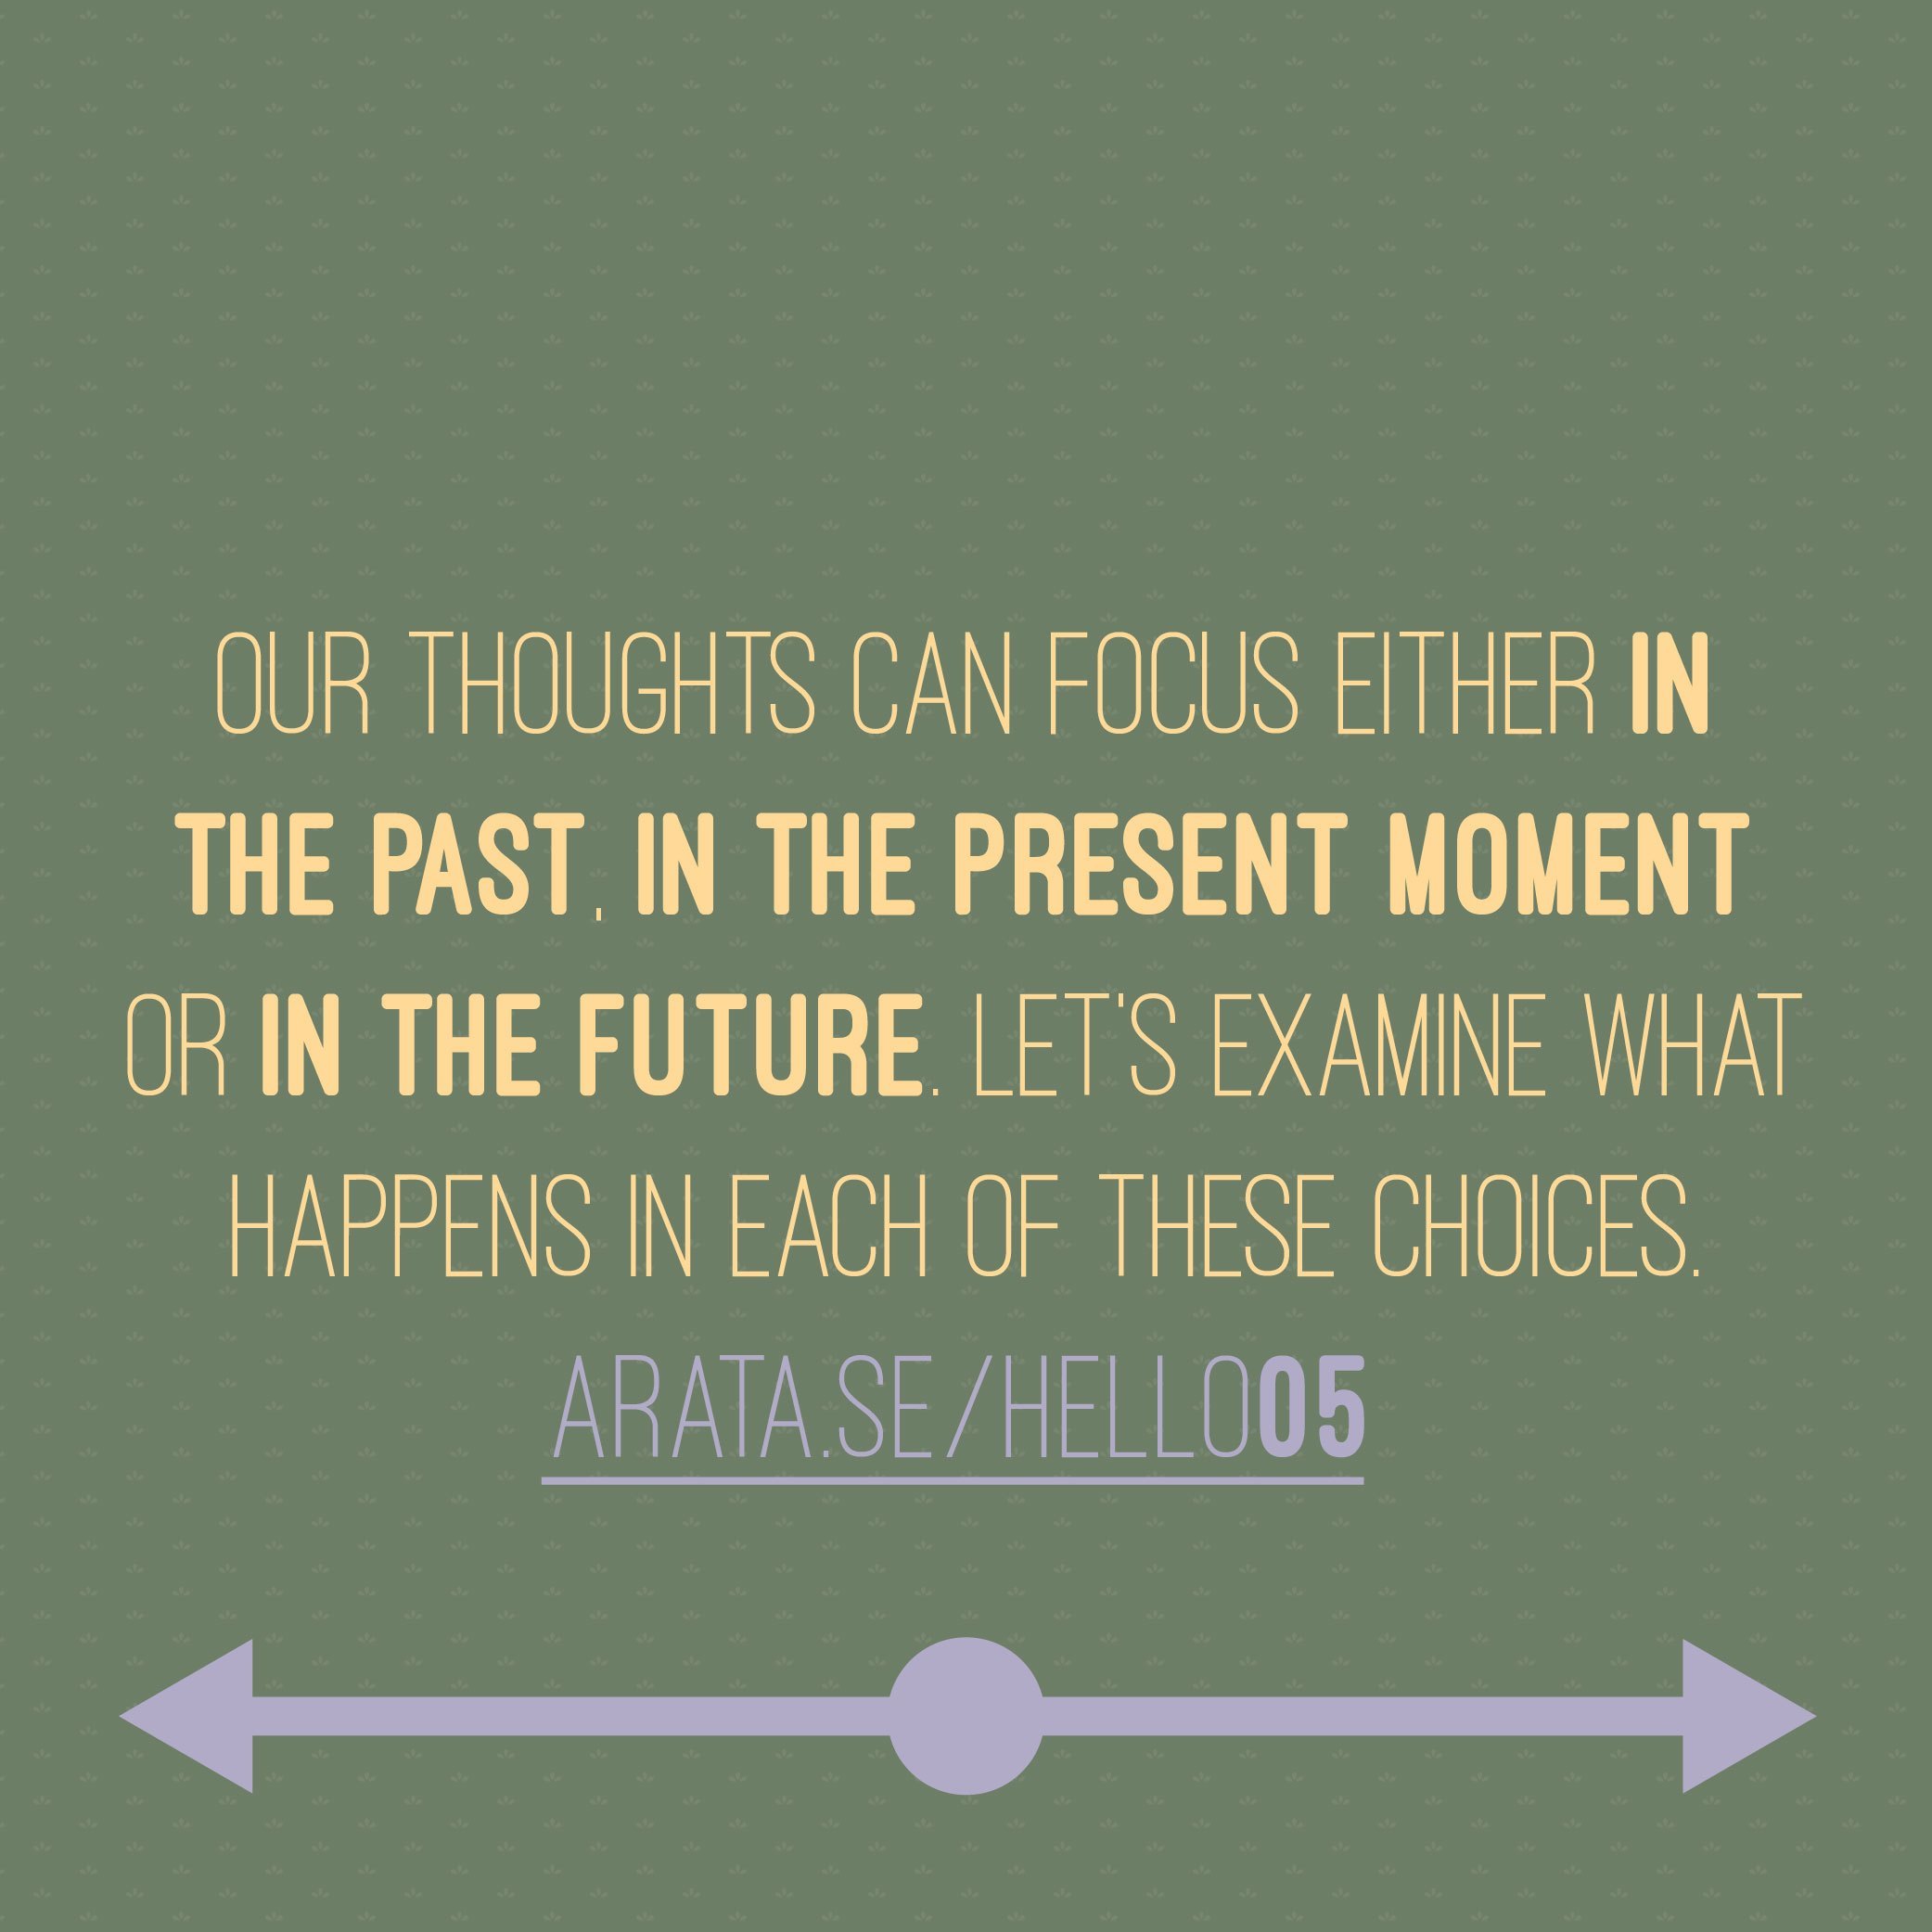 Be in the moment: Our thoughts can focus either in the past, in the present moment or in the future. Let’s examine what happens in each of these choices.